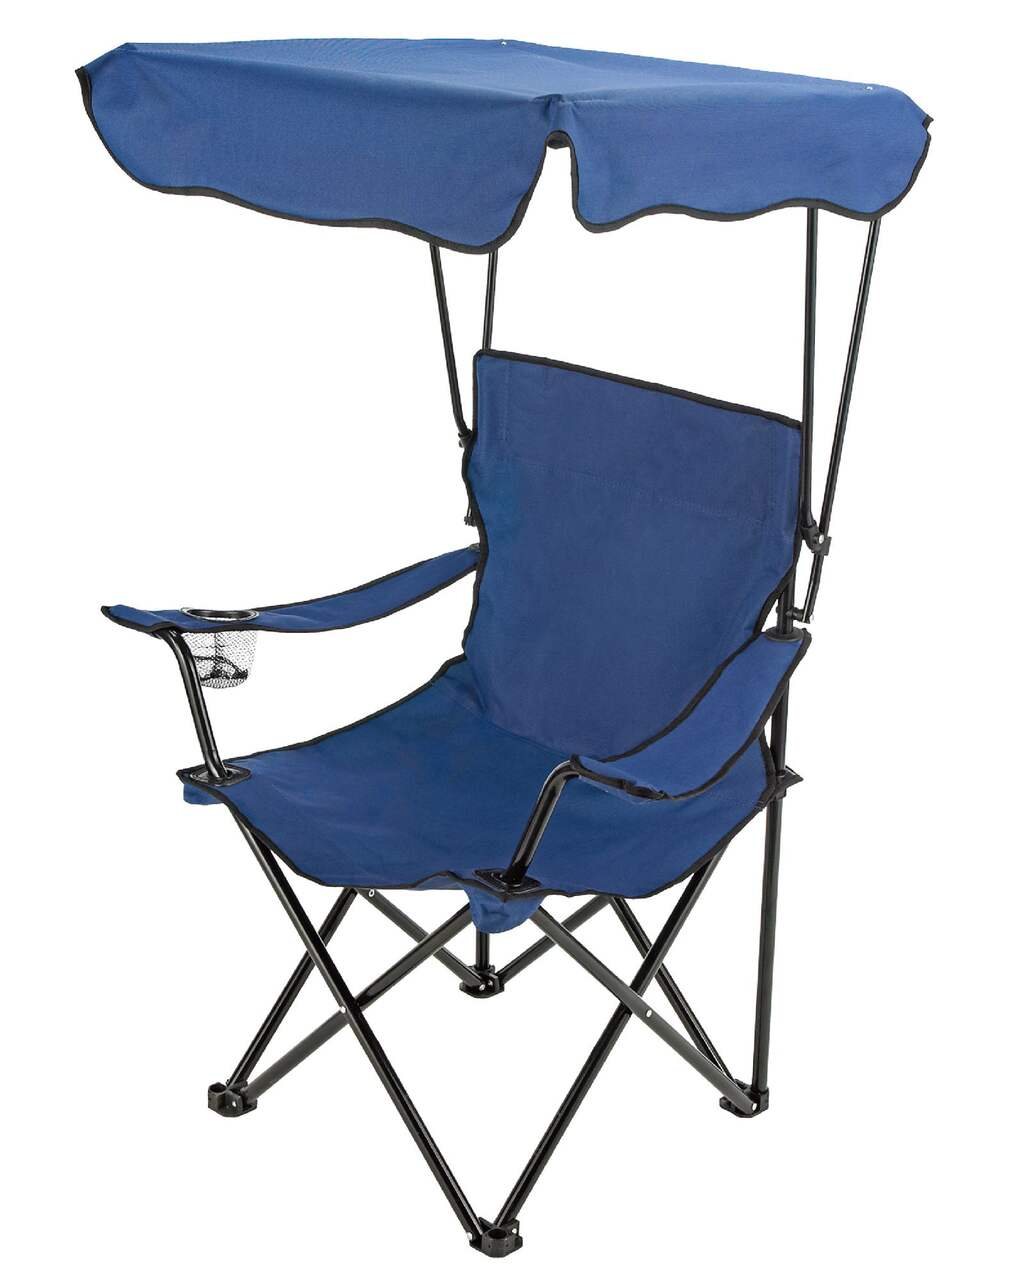 https://media-www.canadiantire.ca/product/playing/camping/camping-furniture/0761577/bst-canopy-chair-adl-1cf3c975-8b94-4951-9b38-610c9312894e-jpgrendition.jpg?imdensity=1&imwidth=1244&impolicy=mZoom